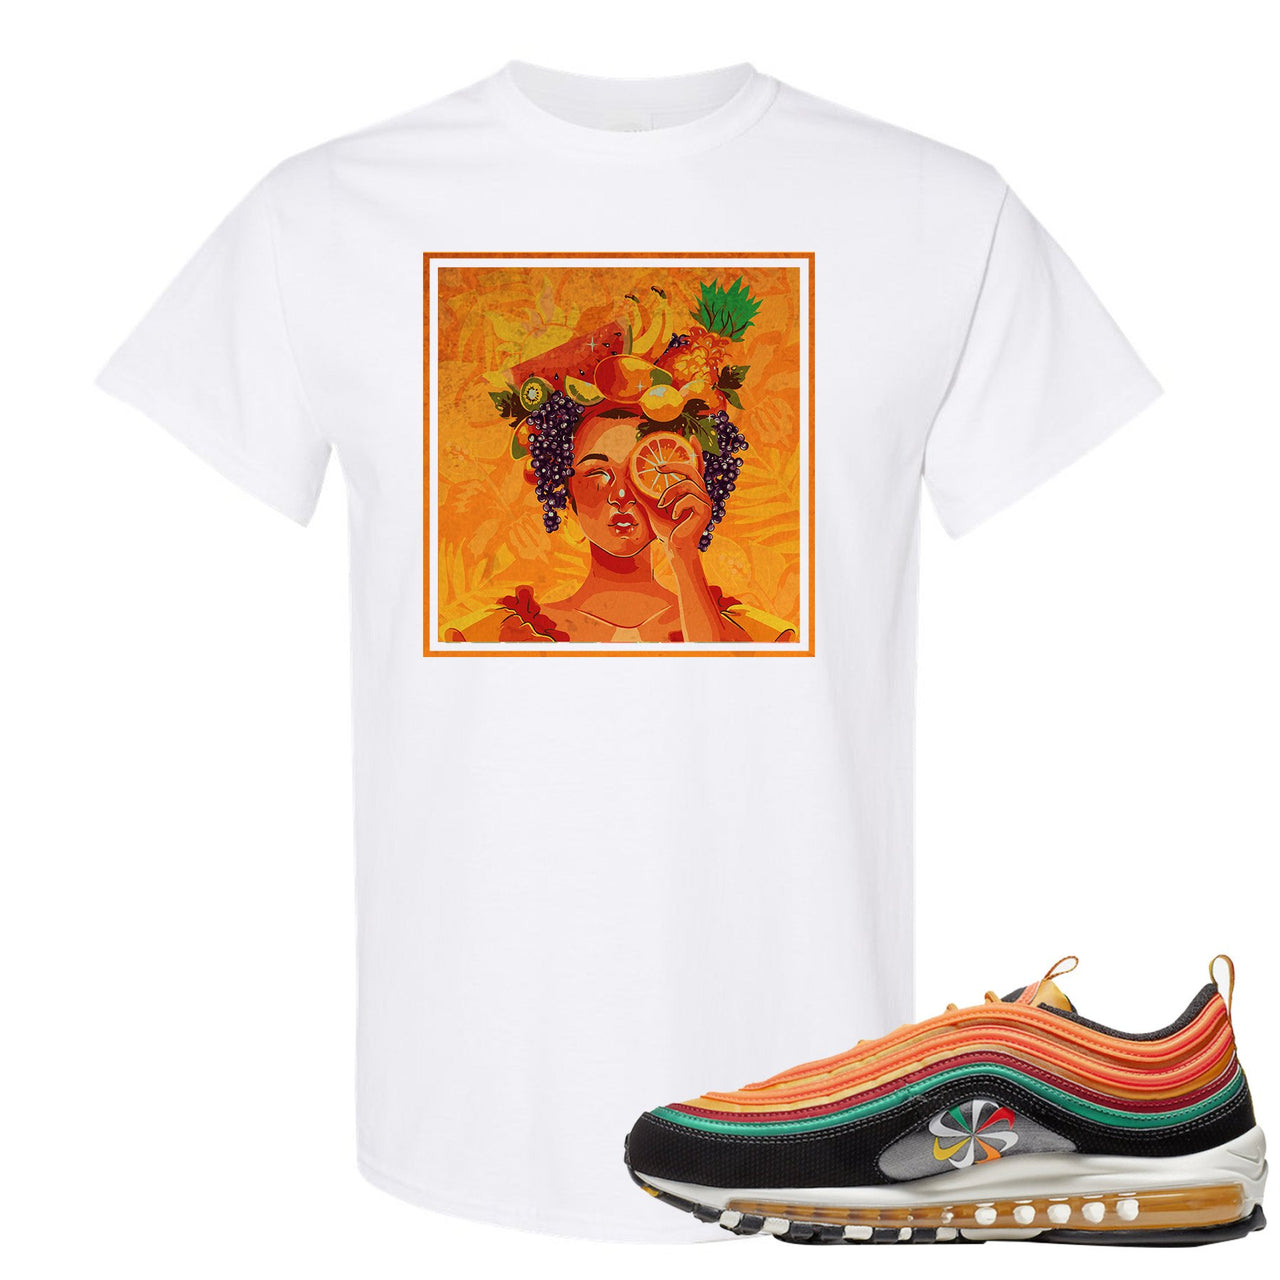 Printed on the front of the Air Max 97 Sunburst white sneaker matching t-shirt is the Lady Fruit logo